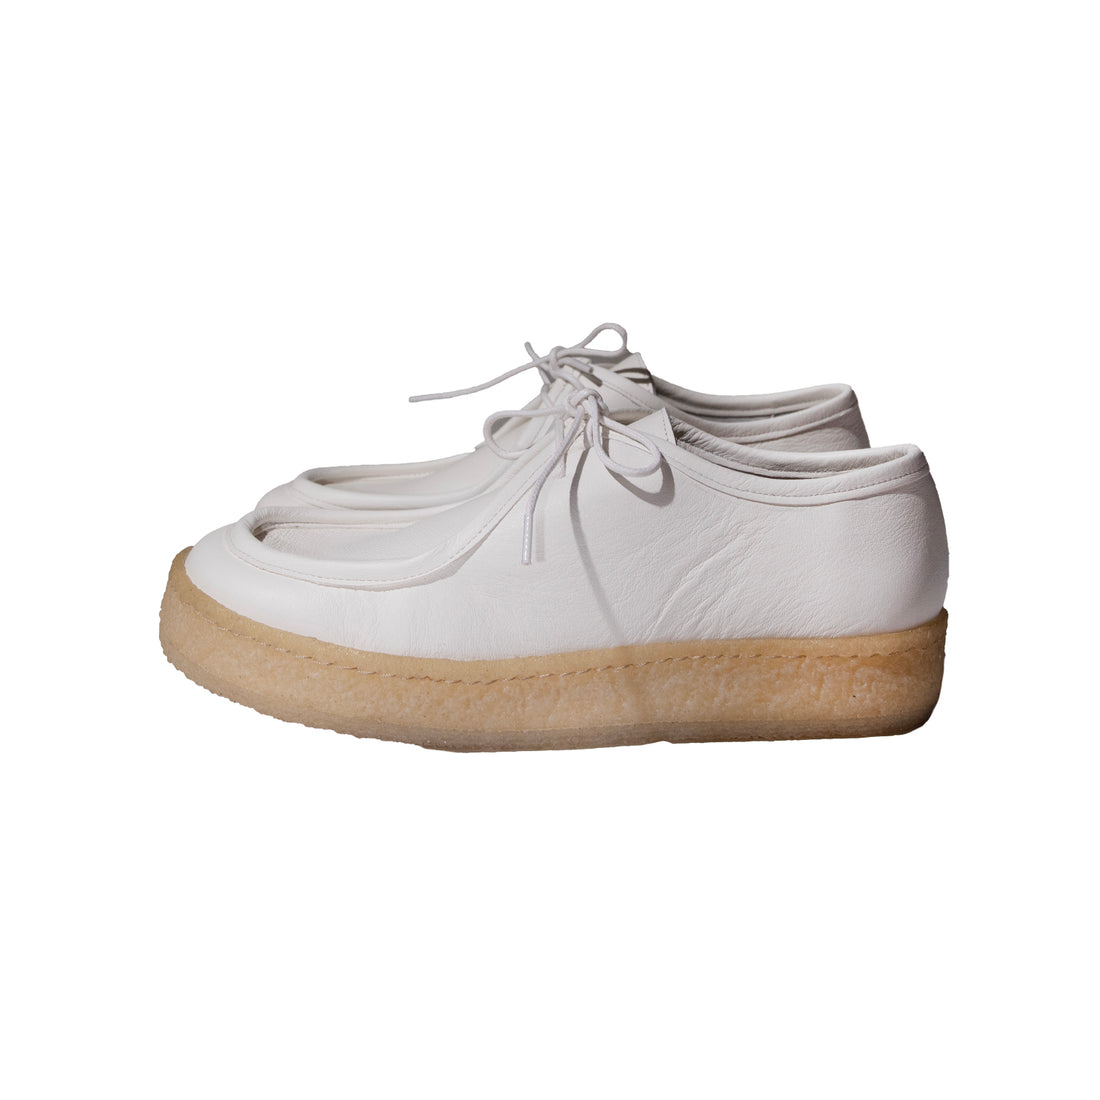 Studio Nicholson Leitch Lace Up in White